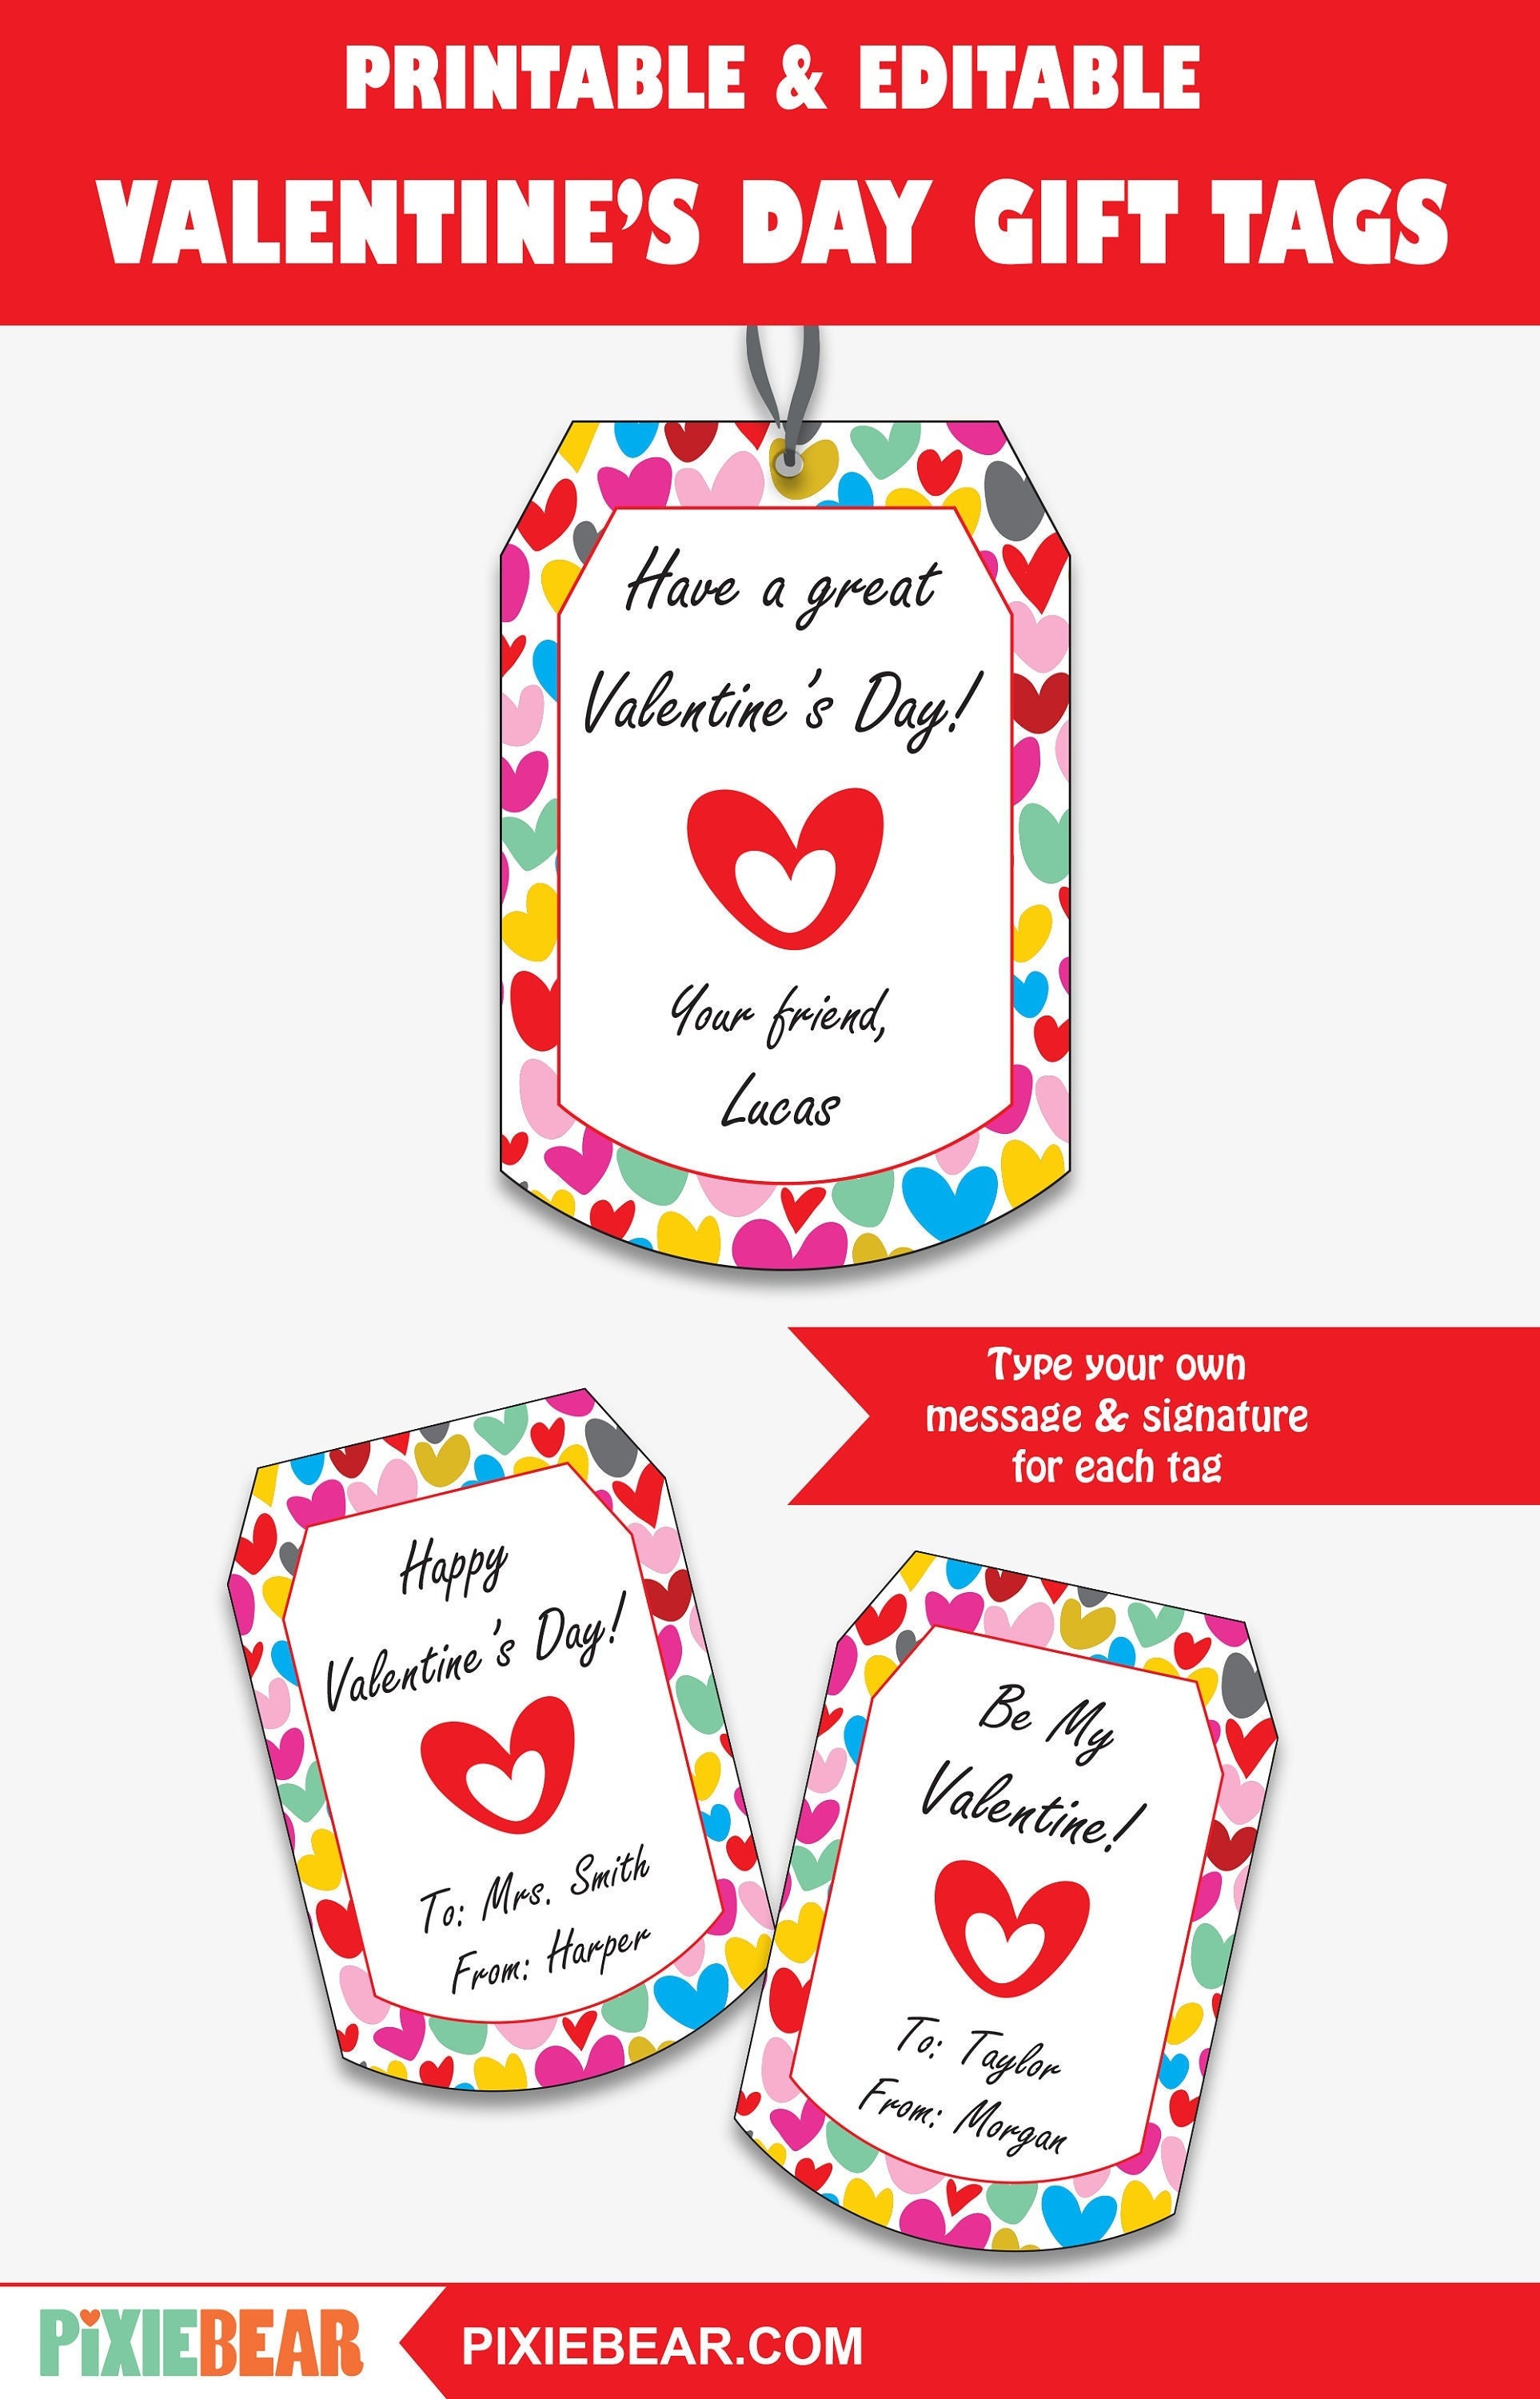 Shop Happy Valentines Day Heart Stickers with great discounts and prices  online - Jan 2024